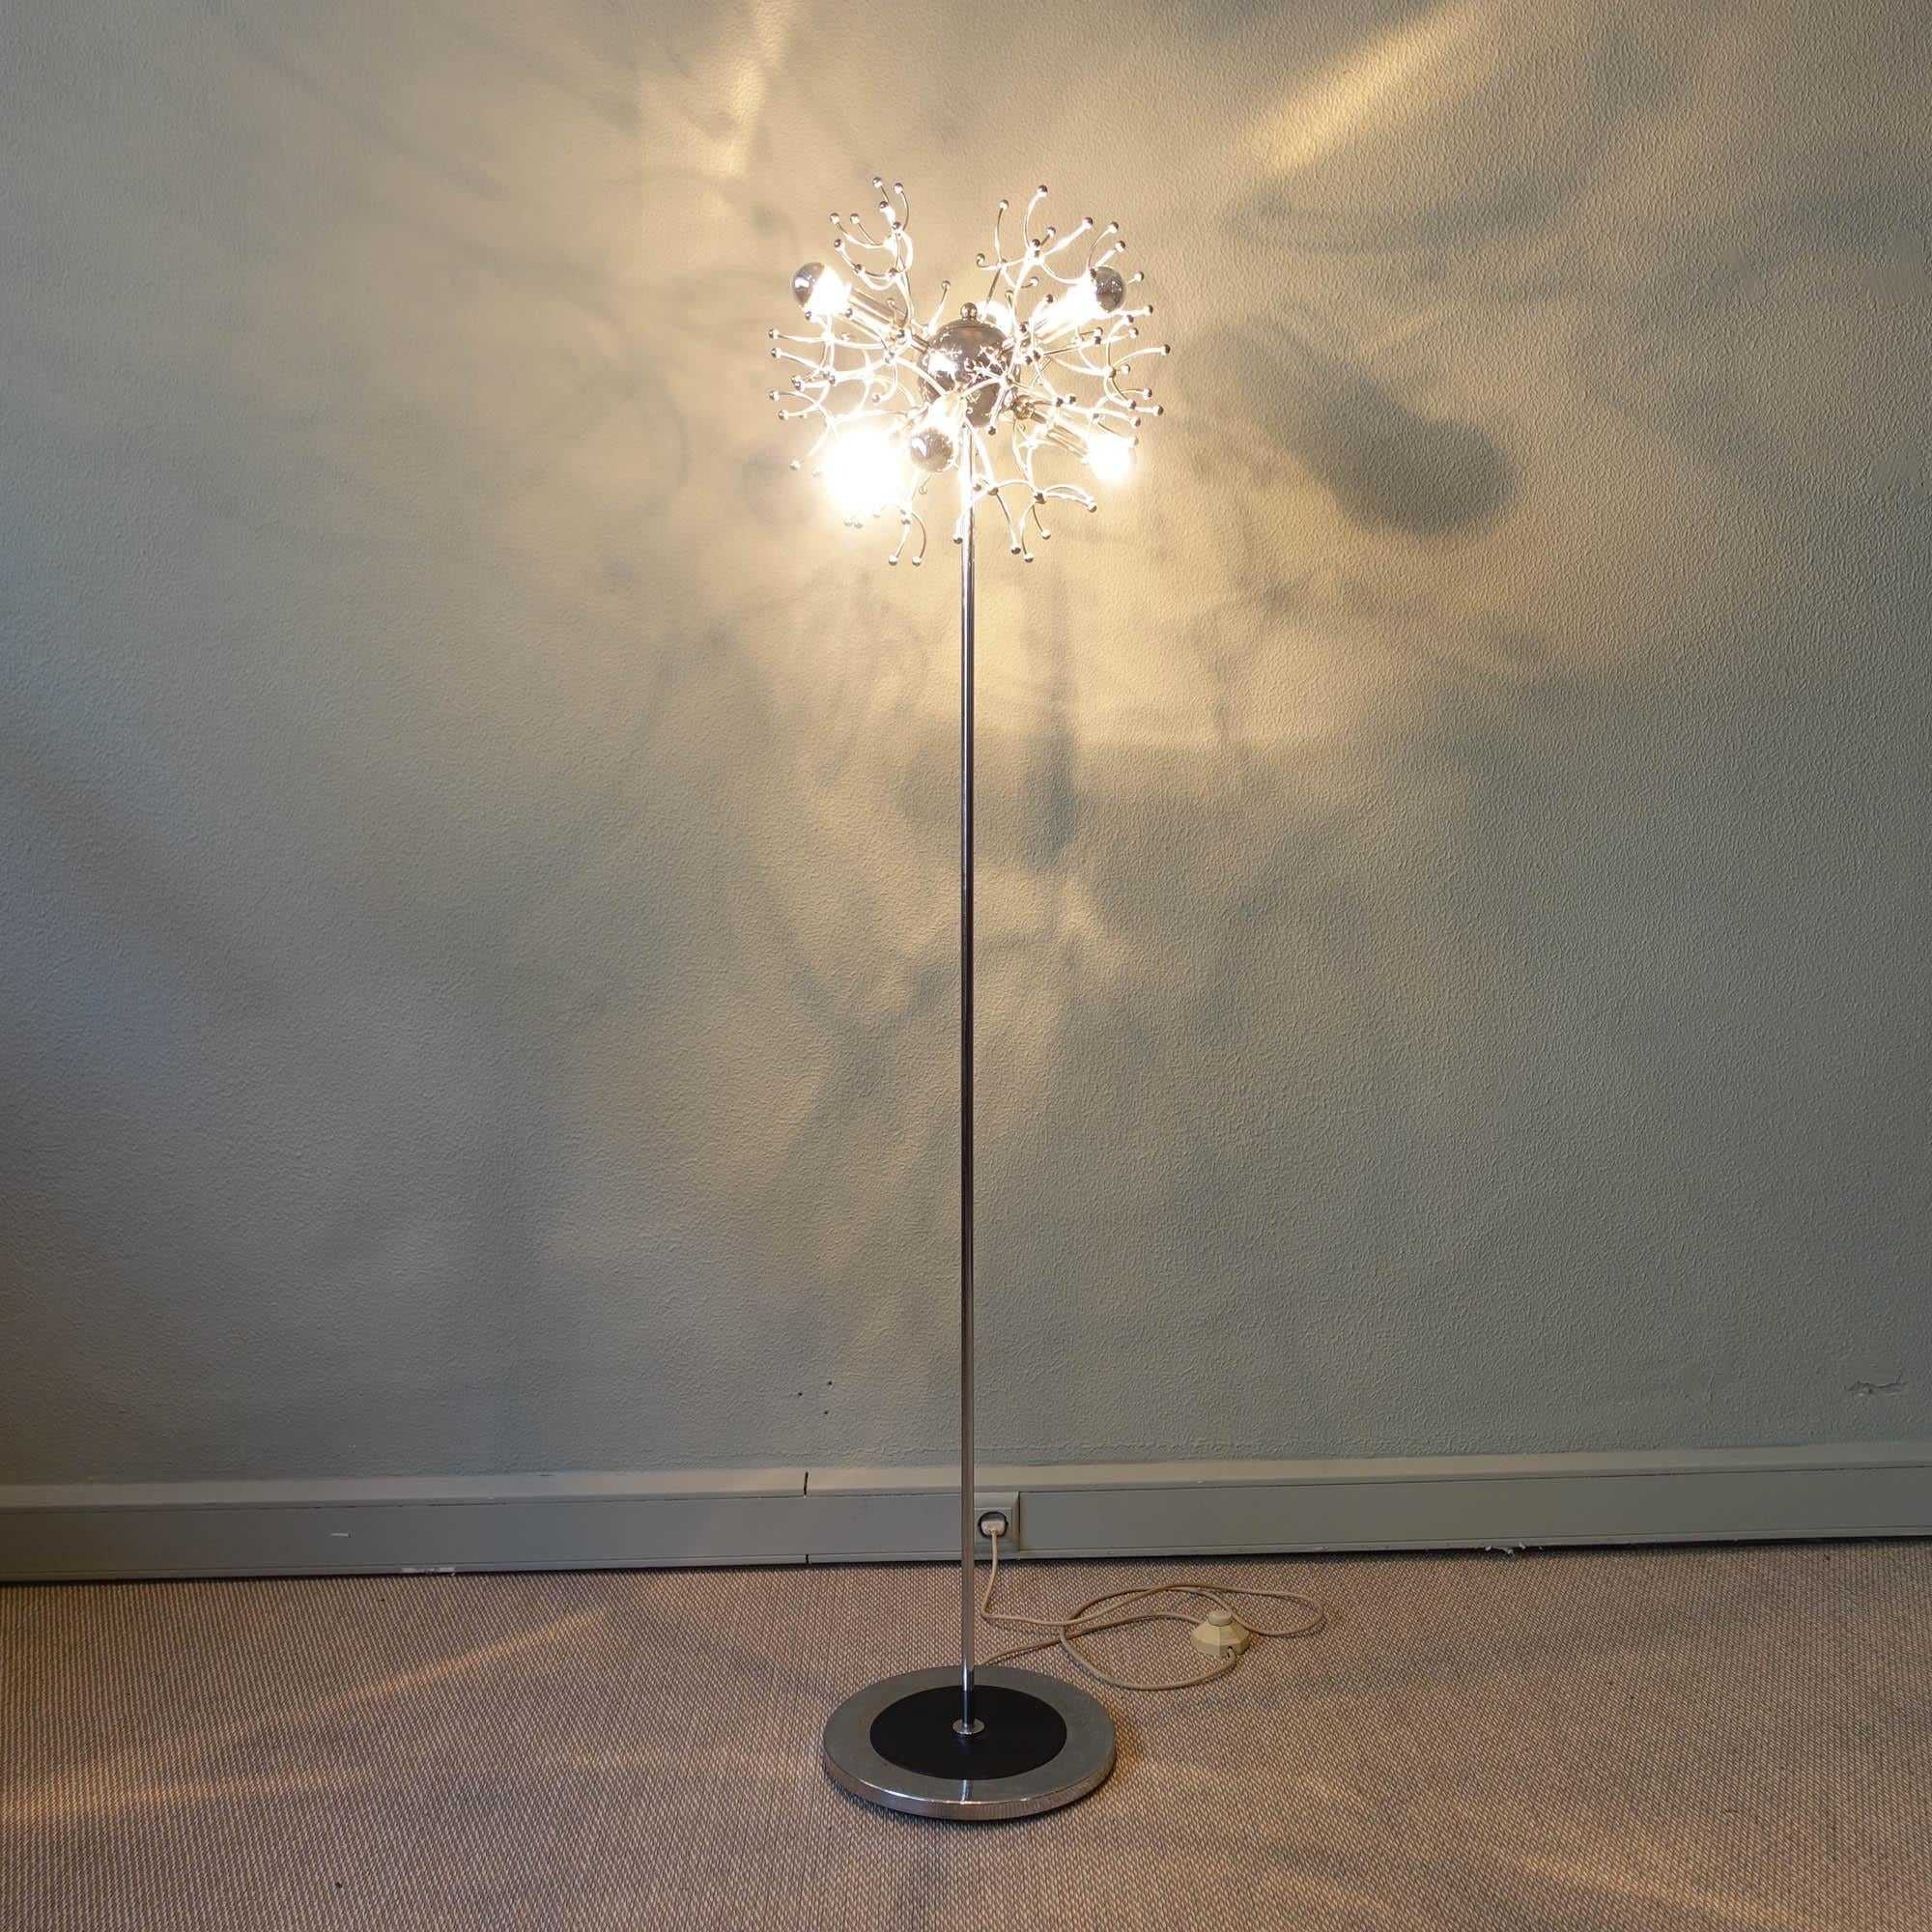 This floor lamp was designed by Gaetano Sciolari and produced by Sciolari Illuminazione Arlum Srl in the 1970s. It features six lights at different heights and positions. The lamp is made from chromed metal, chrome rods, curved rods and little